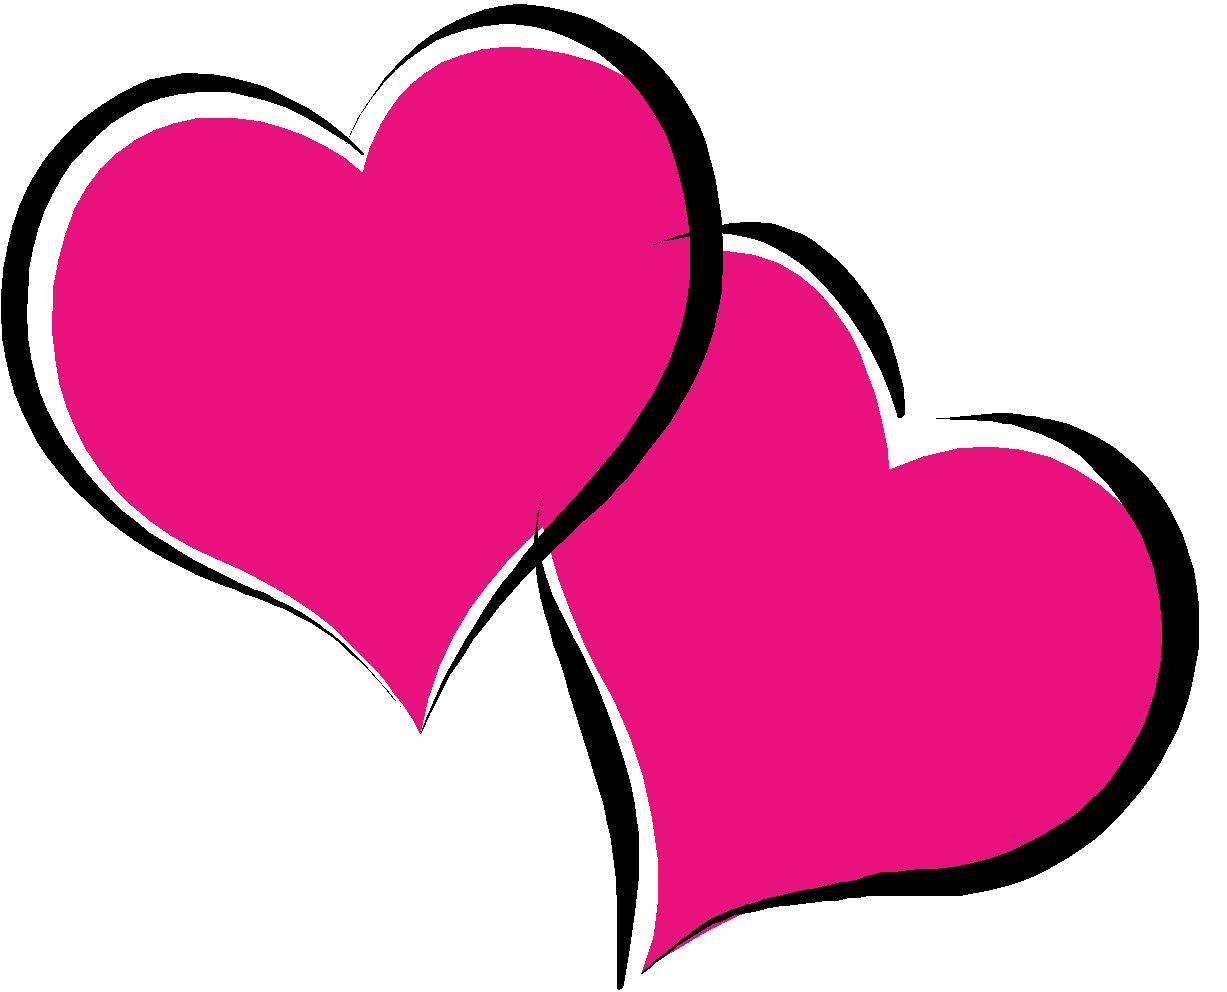 Heart Clip Art Free Download - Free Clipart Images